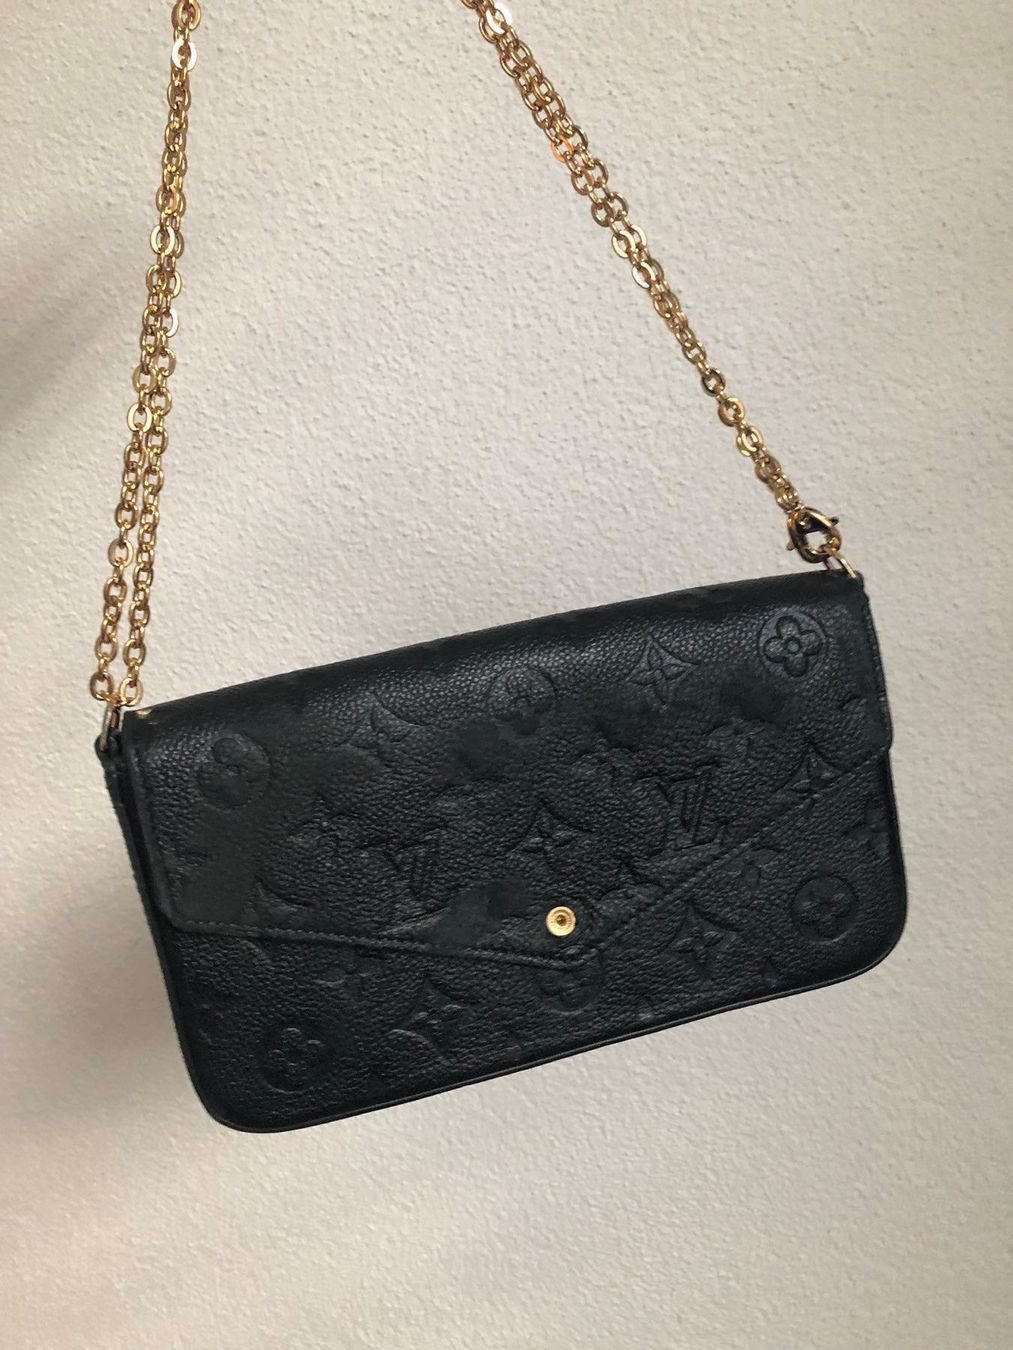 DHGATE FELICIE POCHETTE  DHGATE BLACK EMPREINTE AND BY THE POOL